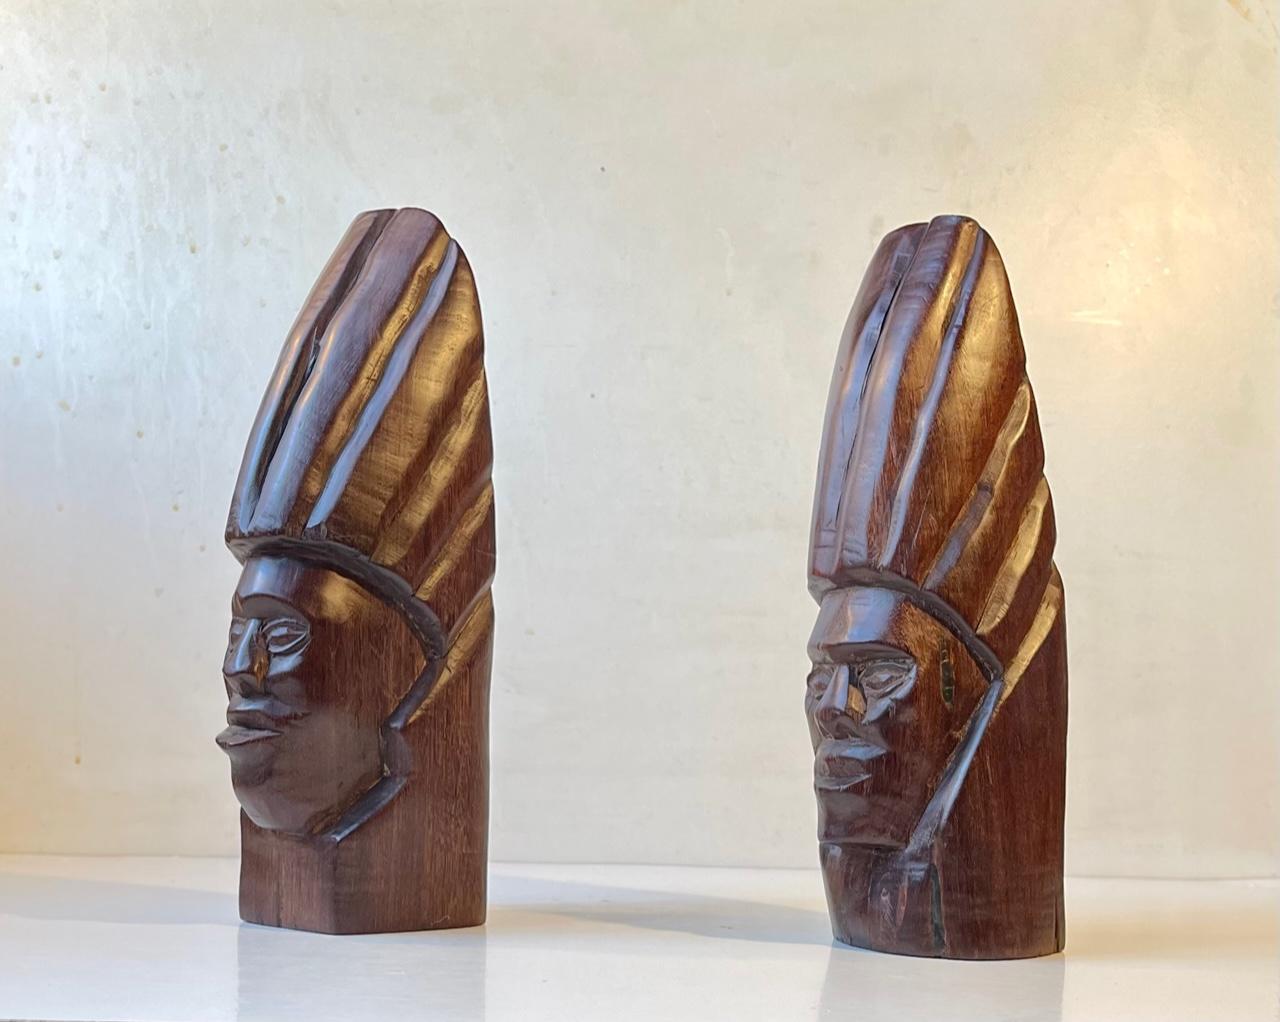 A set of heavy wooden bookends hand-carved with primitive tools. Both carved from one piece of wood. Slight differences in appearances/design. Precise origin unknown. Brought home by a Danish Traveler circa 1970. Measurements: H: 29/27.5 cm, W: